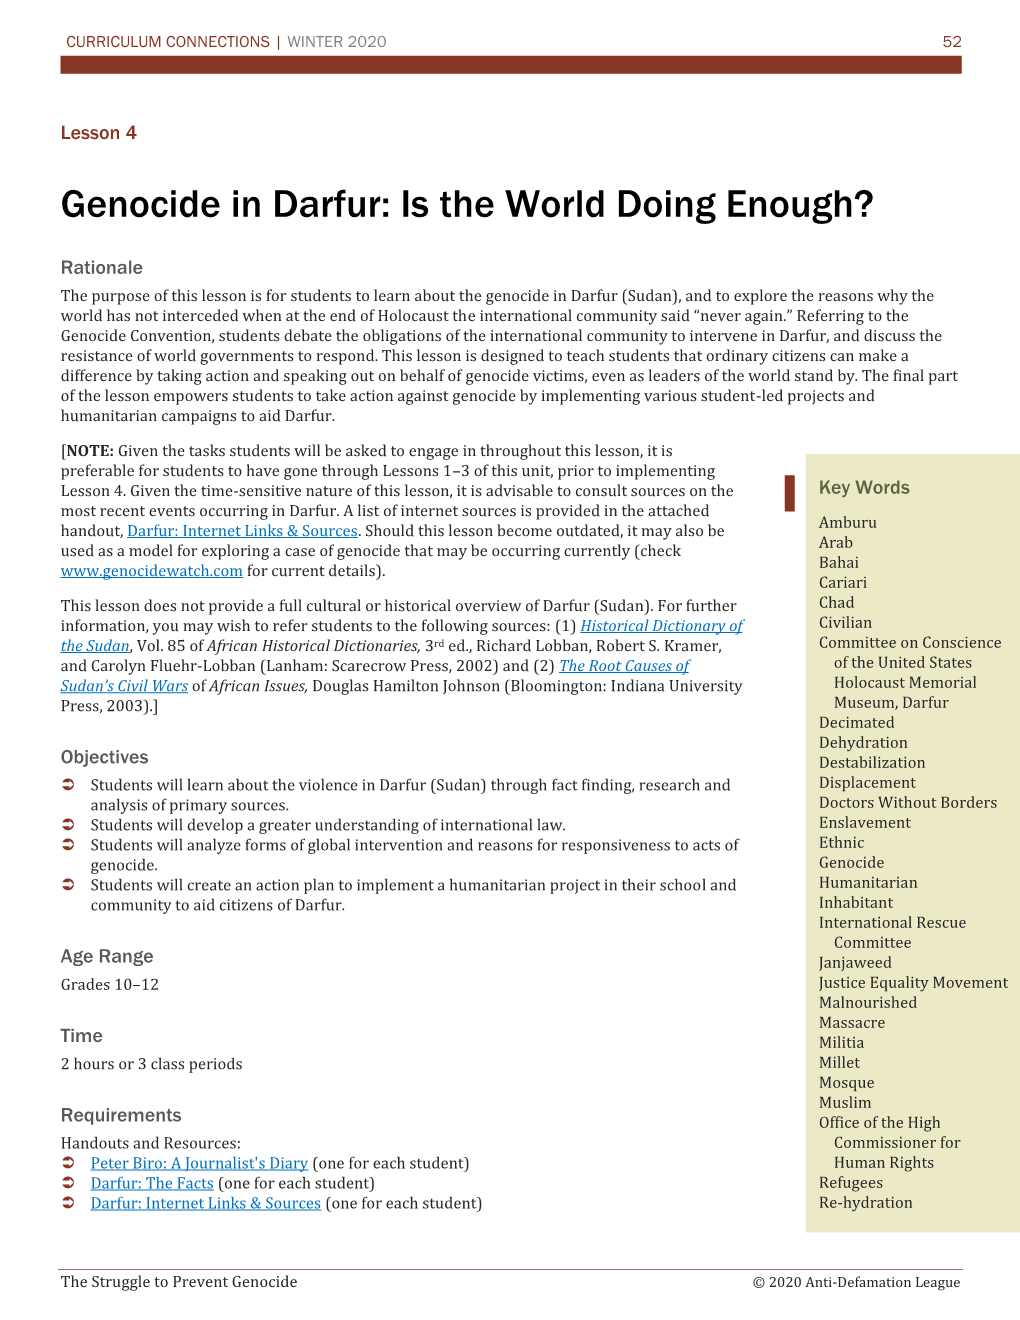 Genocide in Darfur: Is the World Doing Enough?